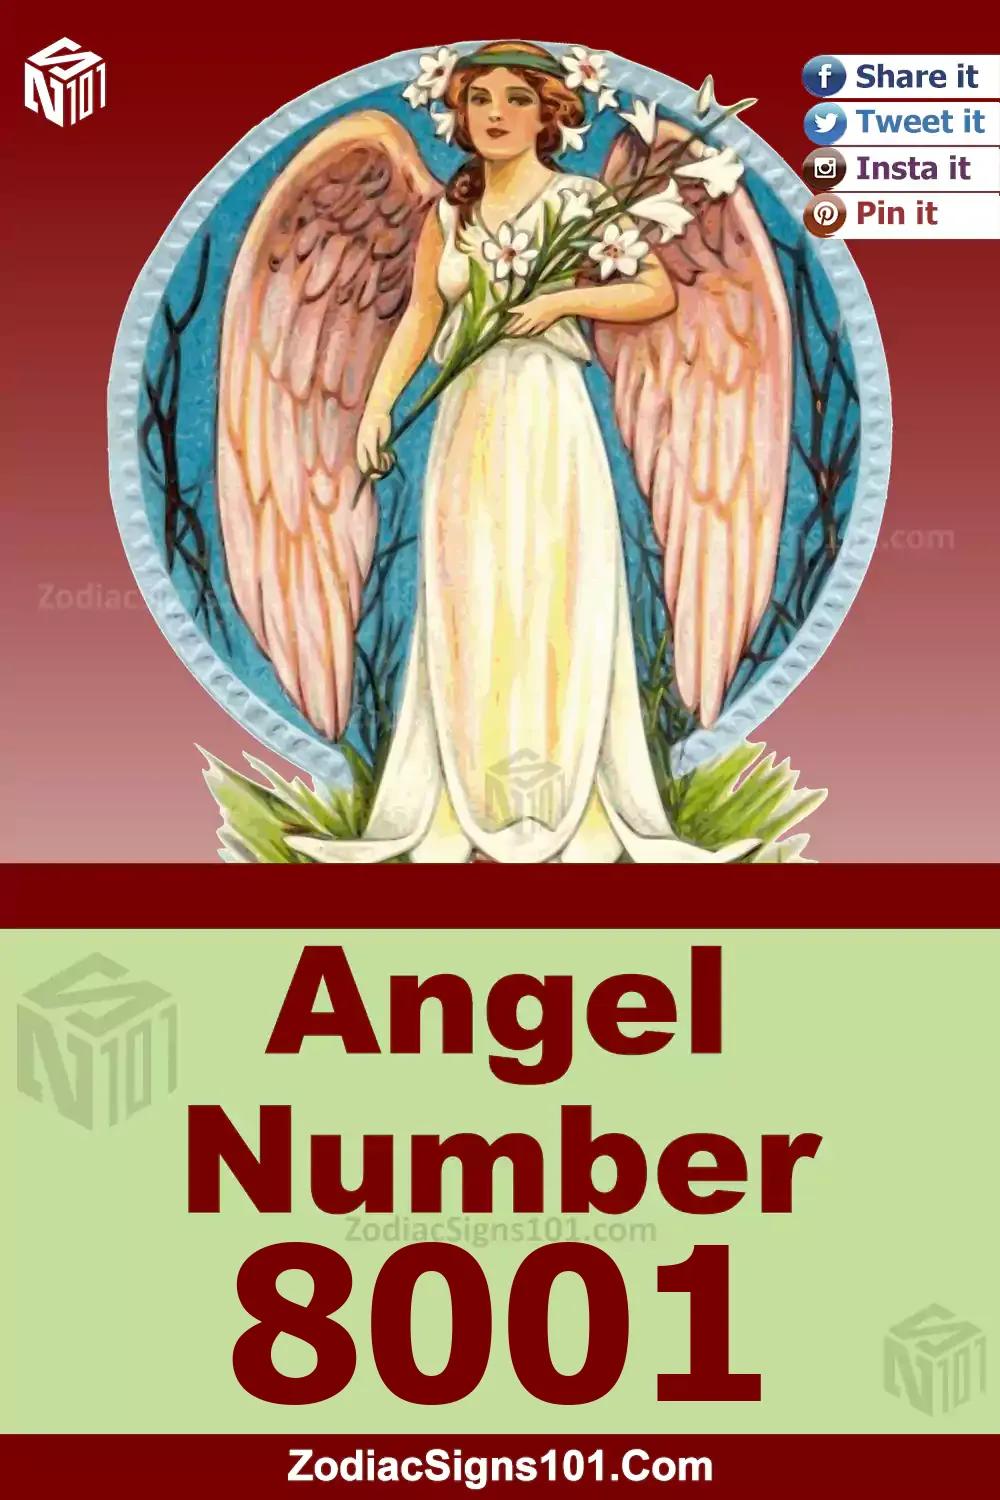 8001 Angel Number Meaning